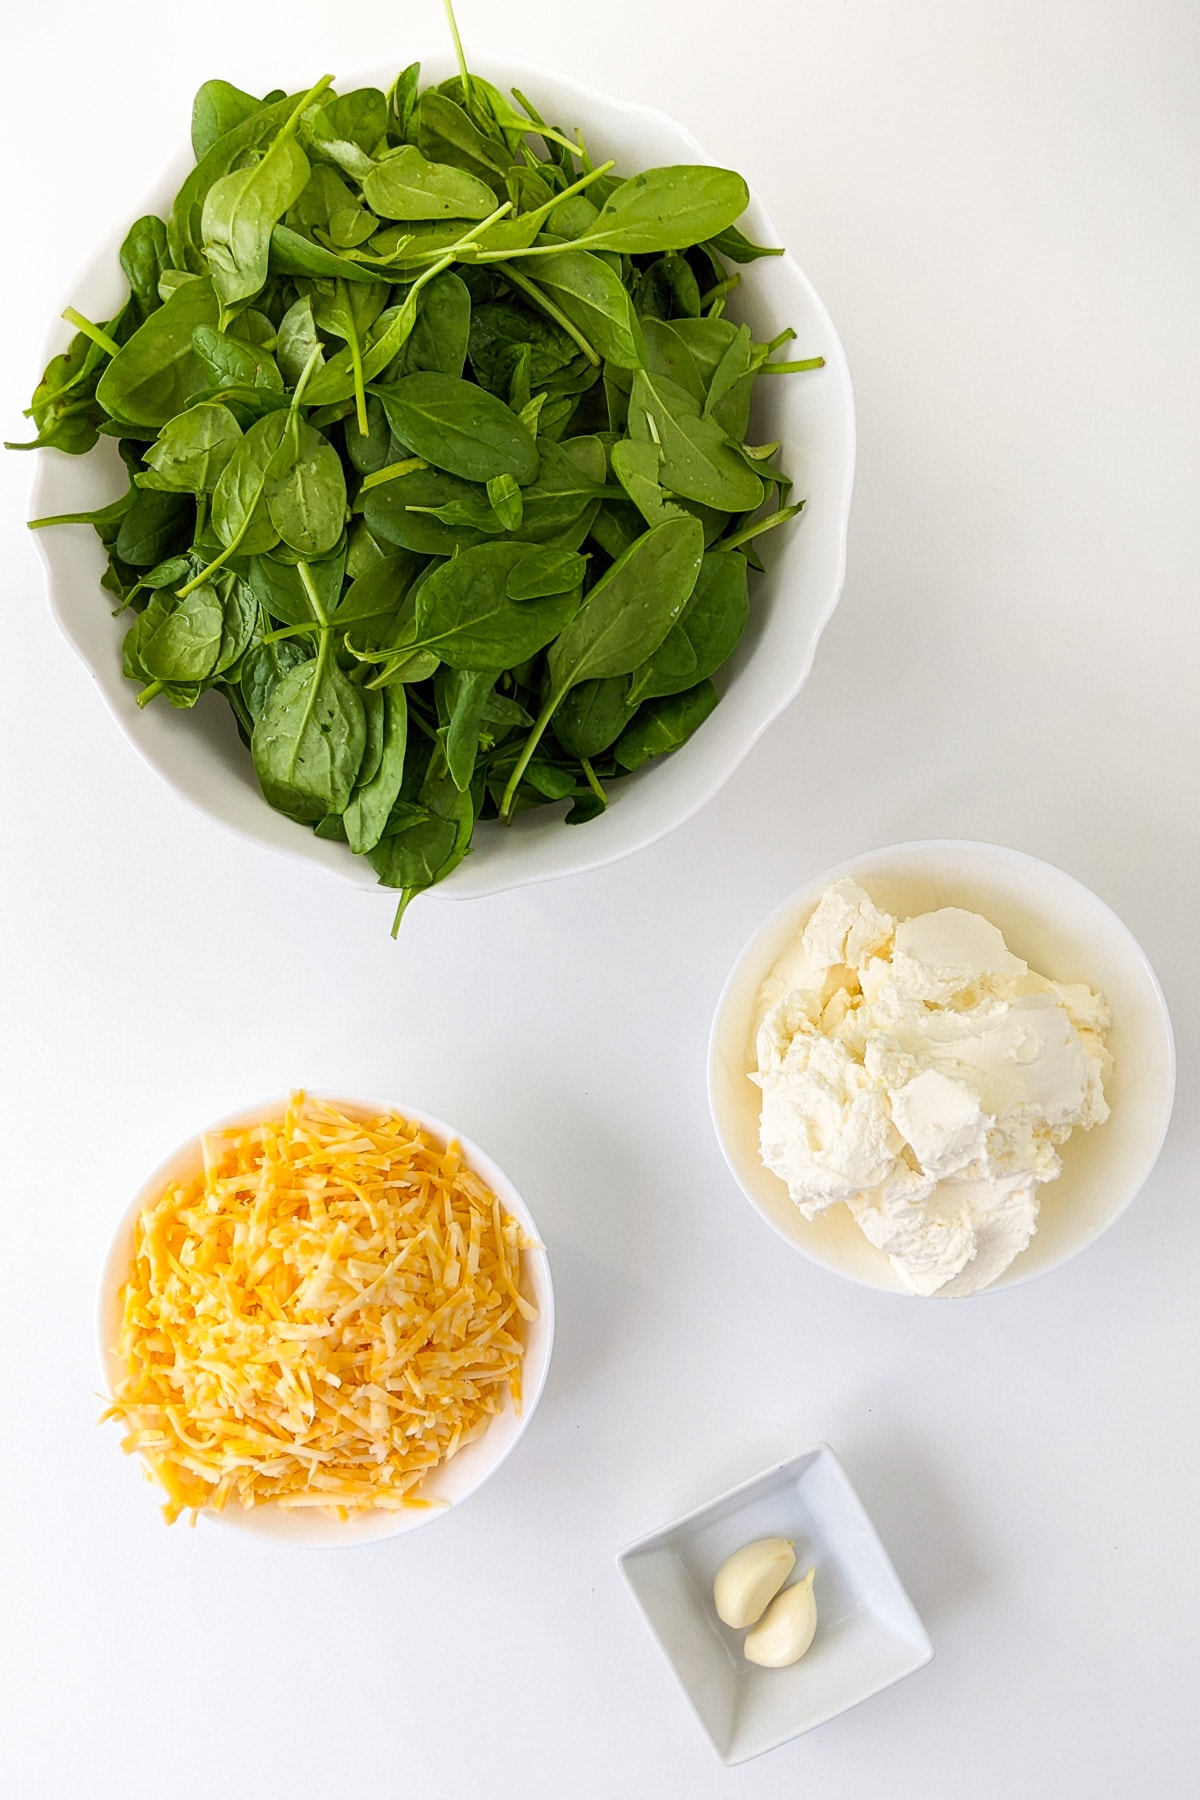 Large plate with fresh spinach near a plate with cheddar and cream cheese.